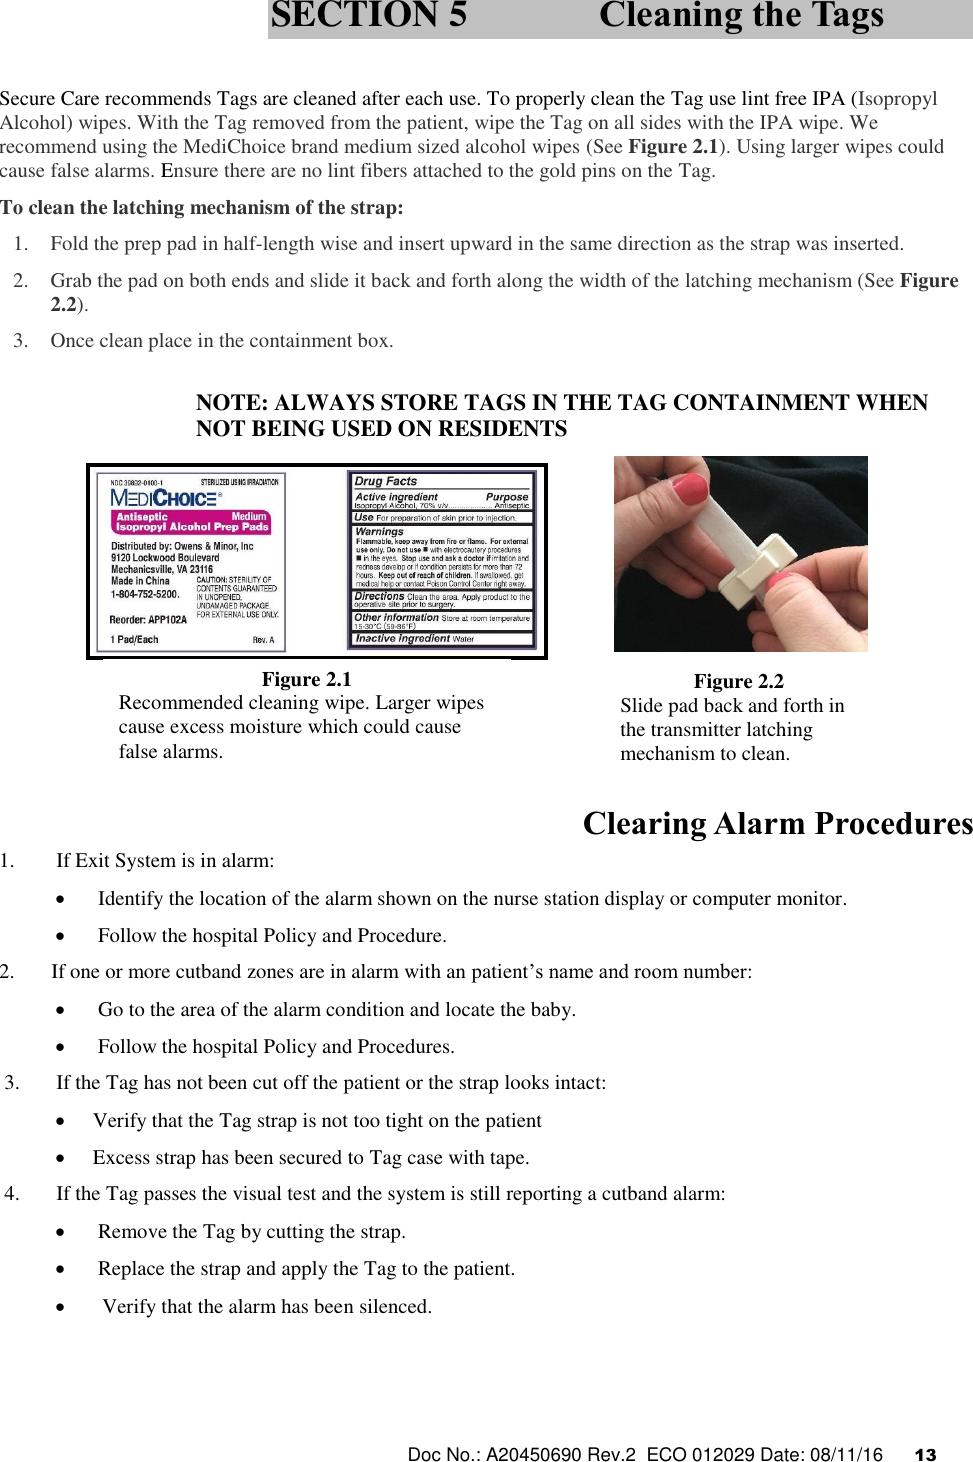  Doc No.: A20450690 Rev.2  ECO 012029 Date: 08/11/16      13    Secure Care recommends Tags are cleaned after each use. To properly clean the Tag use lint free IPA (Isopropyl Alcohol) wipes. With the Tag removed from the patient, wipe the Tag on all sides with the IPA wipe. We recommend using the MediChoice brand medium sized alcohol wipes (See Figure 2.1). Using larger wipes could cause false alarms. Ensure there are no lint fibers attached to the gold pins on the Tag.  To clean the latching mechanism of the strap: 1. Fold the prep pad in half-length wise and insert upward in the same direction as the strap was inserted. 2. Grab the pad on both ends and slide it back and forth along the width of the latching mechanism (See Figure 2.2). 3. Once clean place in the containment box.  NOTE: ALWAYS STORE TAGS IN THE TAG CONTAINMENT WHEN NOT BEING USED ON RESIDENTS             Clearing Alarm Procedures 1.        If Exit System is in alarm:   Identify the location of the alarm shown on the nurse station display or computer monitor.    Follow the hospital Policy and Procedure. 2.       If one or more cutband zones are in alarm with an patient’s name and room number:   Go to the area of the alarm condition and locate the baby.   Follow the hospital Policy and Procedures.  3.       If the Tag has not been cut off the patient or the strap looks intact:   Verify that the Tag strap is not too tight on the patient  Excess strap has been secured to Tag case with tape.  4.       If the Tag passes the visual test and the system is still reporting a cutband alarm:   Remove the Tag by cutting the strap.   Replace the strap and apply the Tag to the patient.  Verify that the alarm has been silenced.  SECTION 5 Cleaning the Tags Figure 2.1 Recommended cleaning wipe. Larger wipes cause excess moisture which could cause false alarms. Figure 2.2 Slide pad back and forth in the transmitter latching mechanism to clean.  